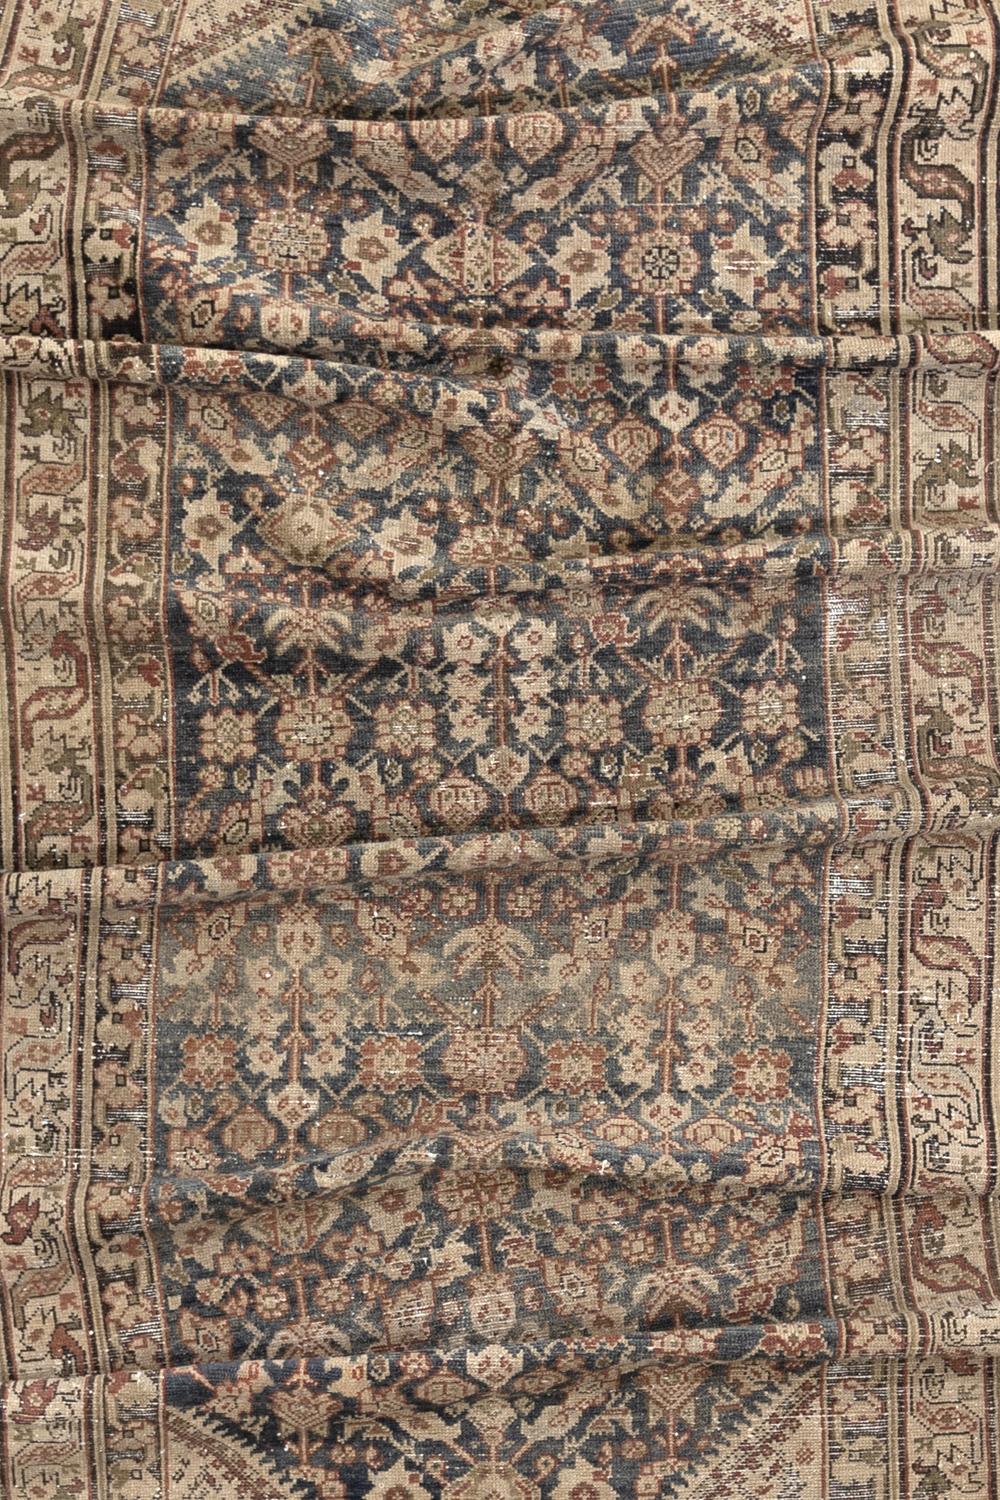 Age: Circa 1920

Colors: navy, rust, pale tan, olive, khaki

Pile: low-medium 

Wear Notes: 3

Material: wool on cotton

Persian Malayer gallery rug woven in the first quarter of the 20th century. Beautiful colors that are earthy and soft. 

Wear